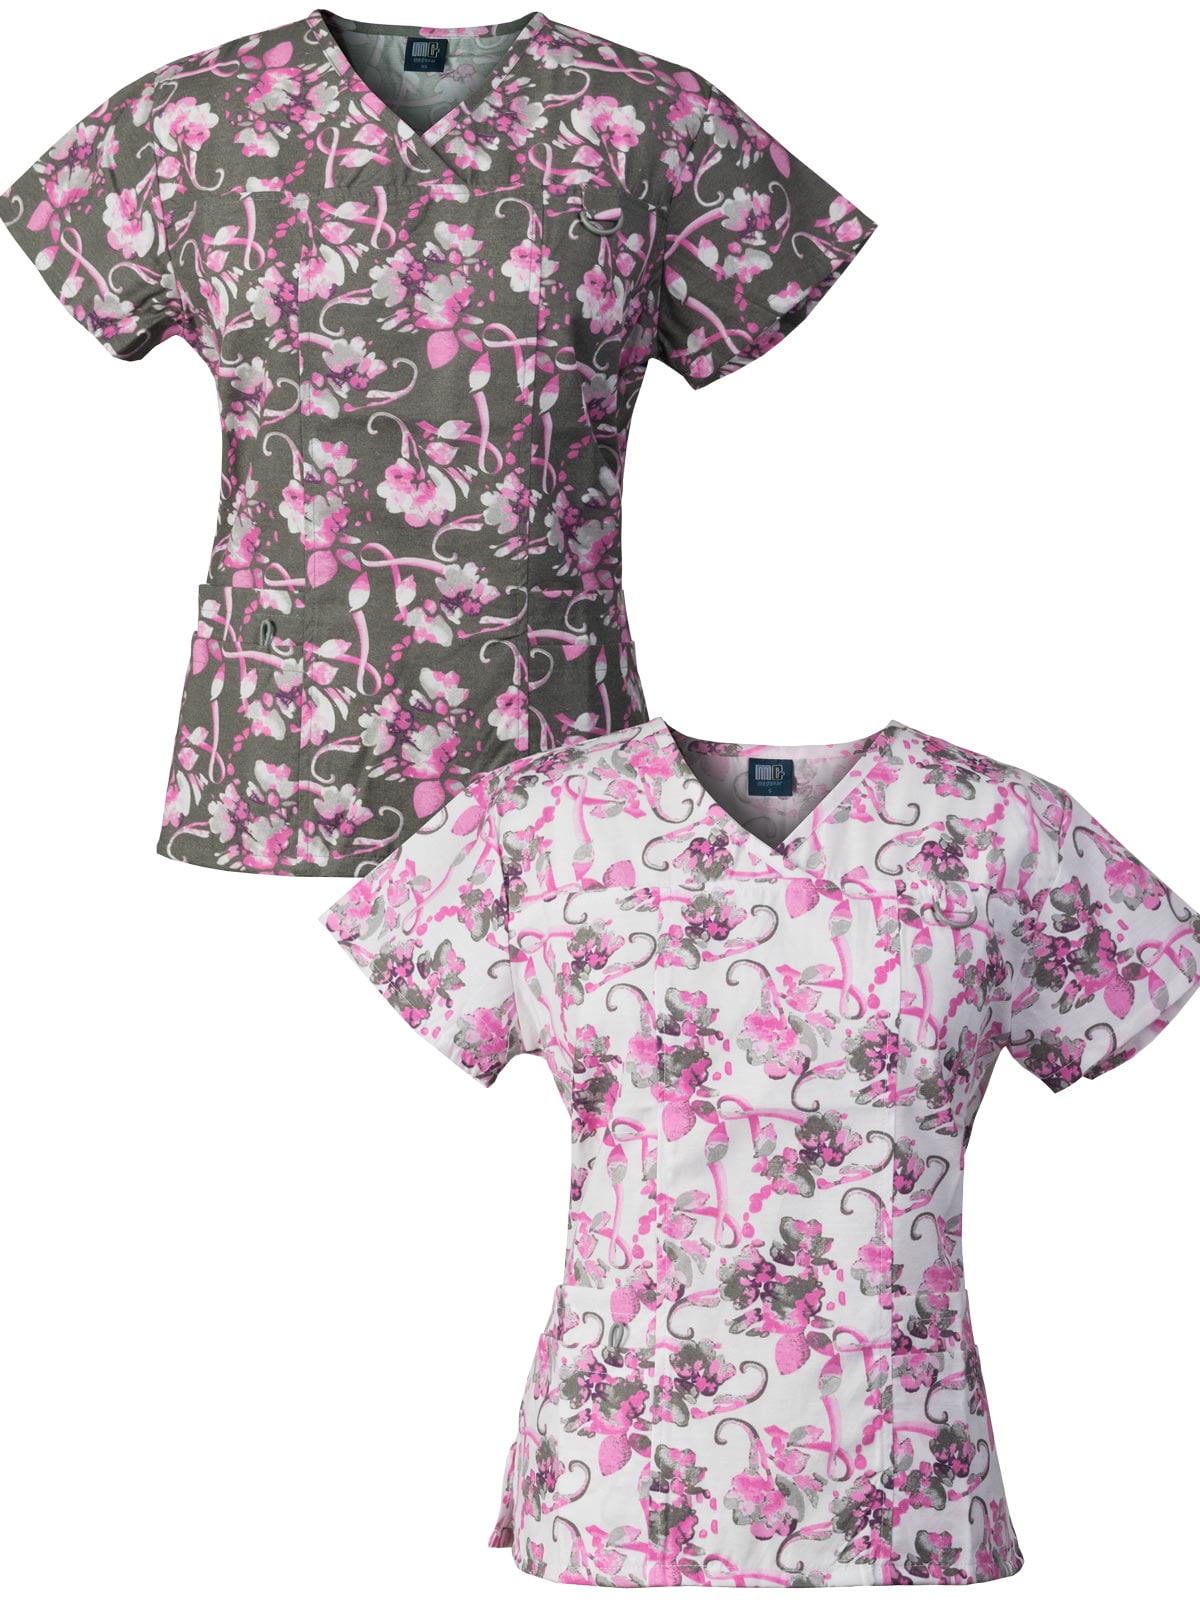 Medgear 2-PACK Womens Printed Scrub Tops with 4 Pockets & ID Loop AMSA-AMWH 